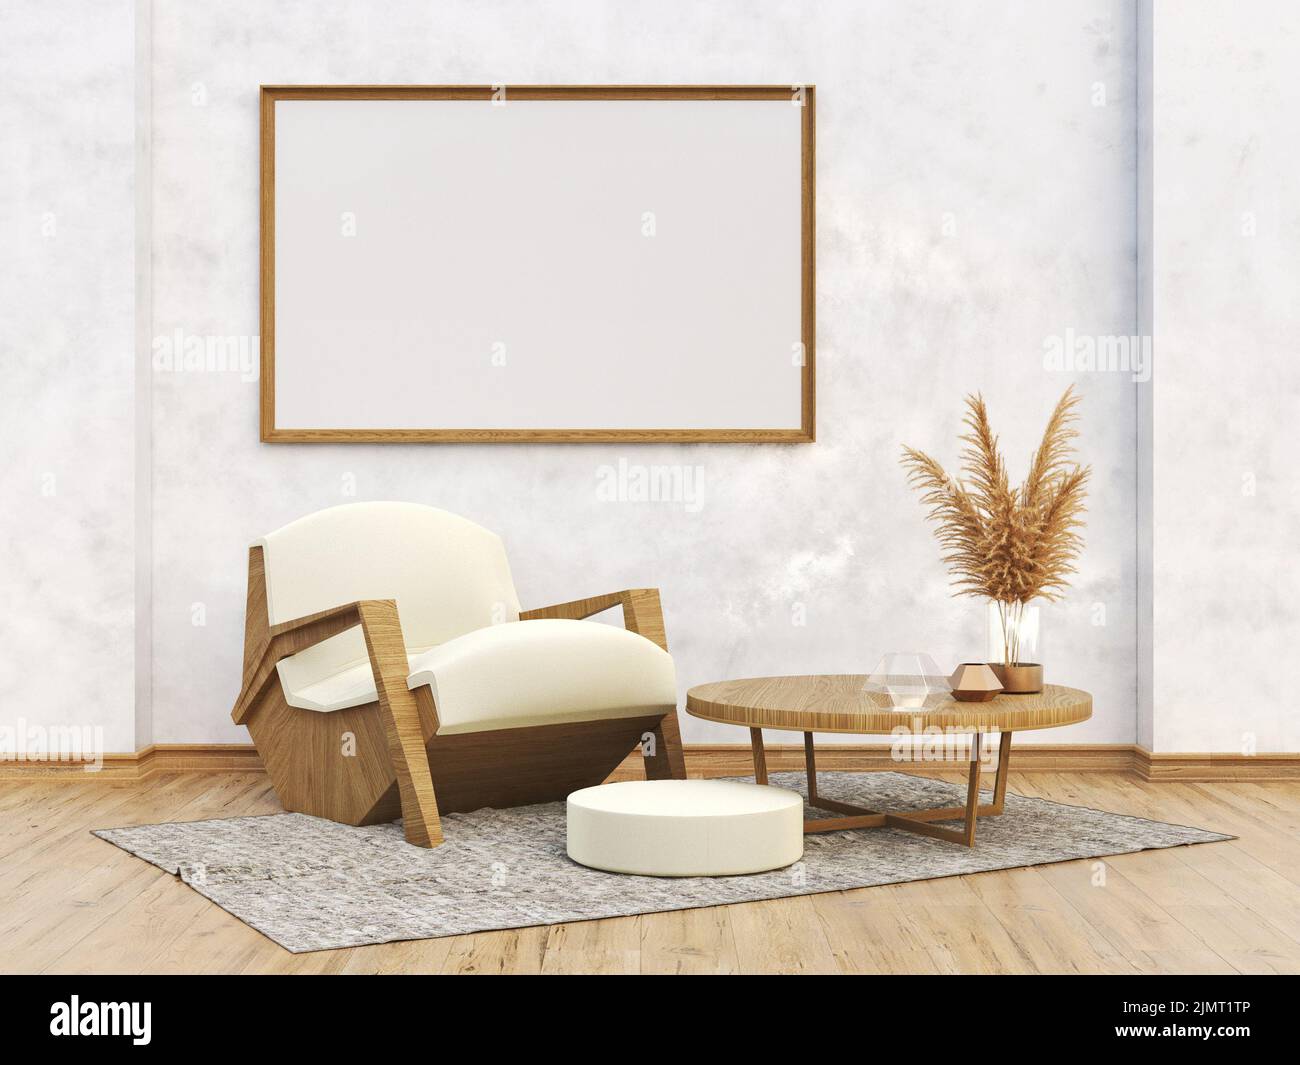 Mock up poster frame with big wooden armchair in modern interior background 3D Stock Photo